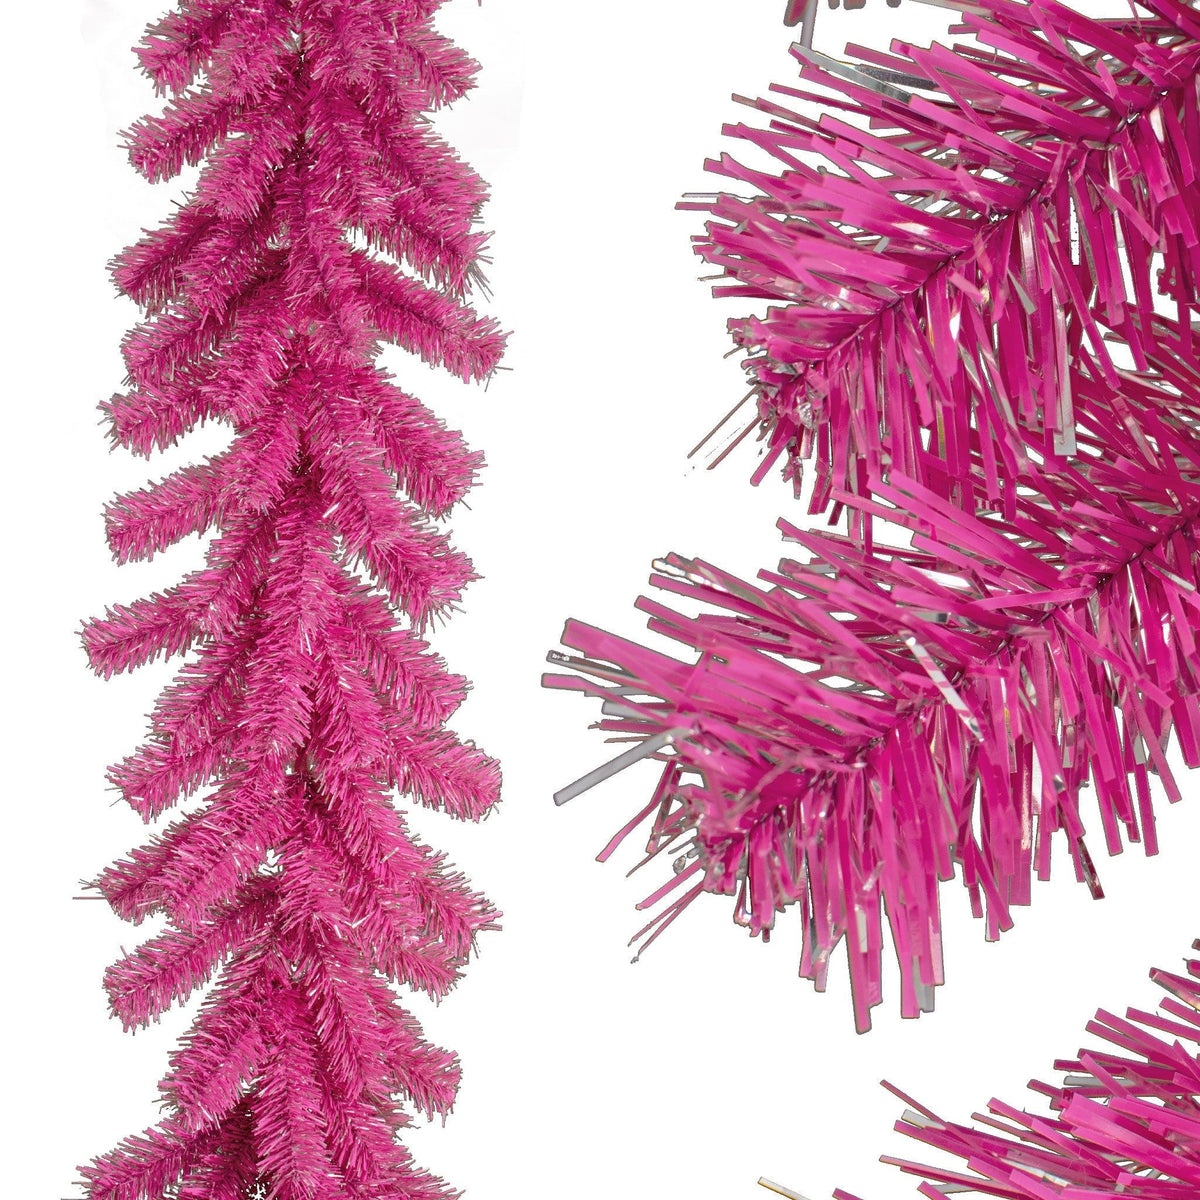   Shop for Lee Display's brand new 6FT Pink and Silver Tinsel Brush Garlands on sale now at leedisplay.com.